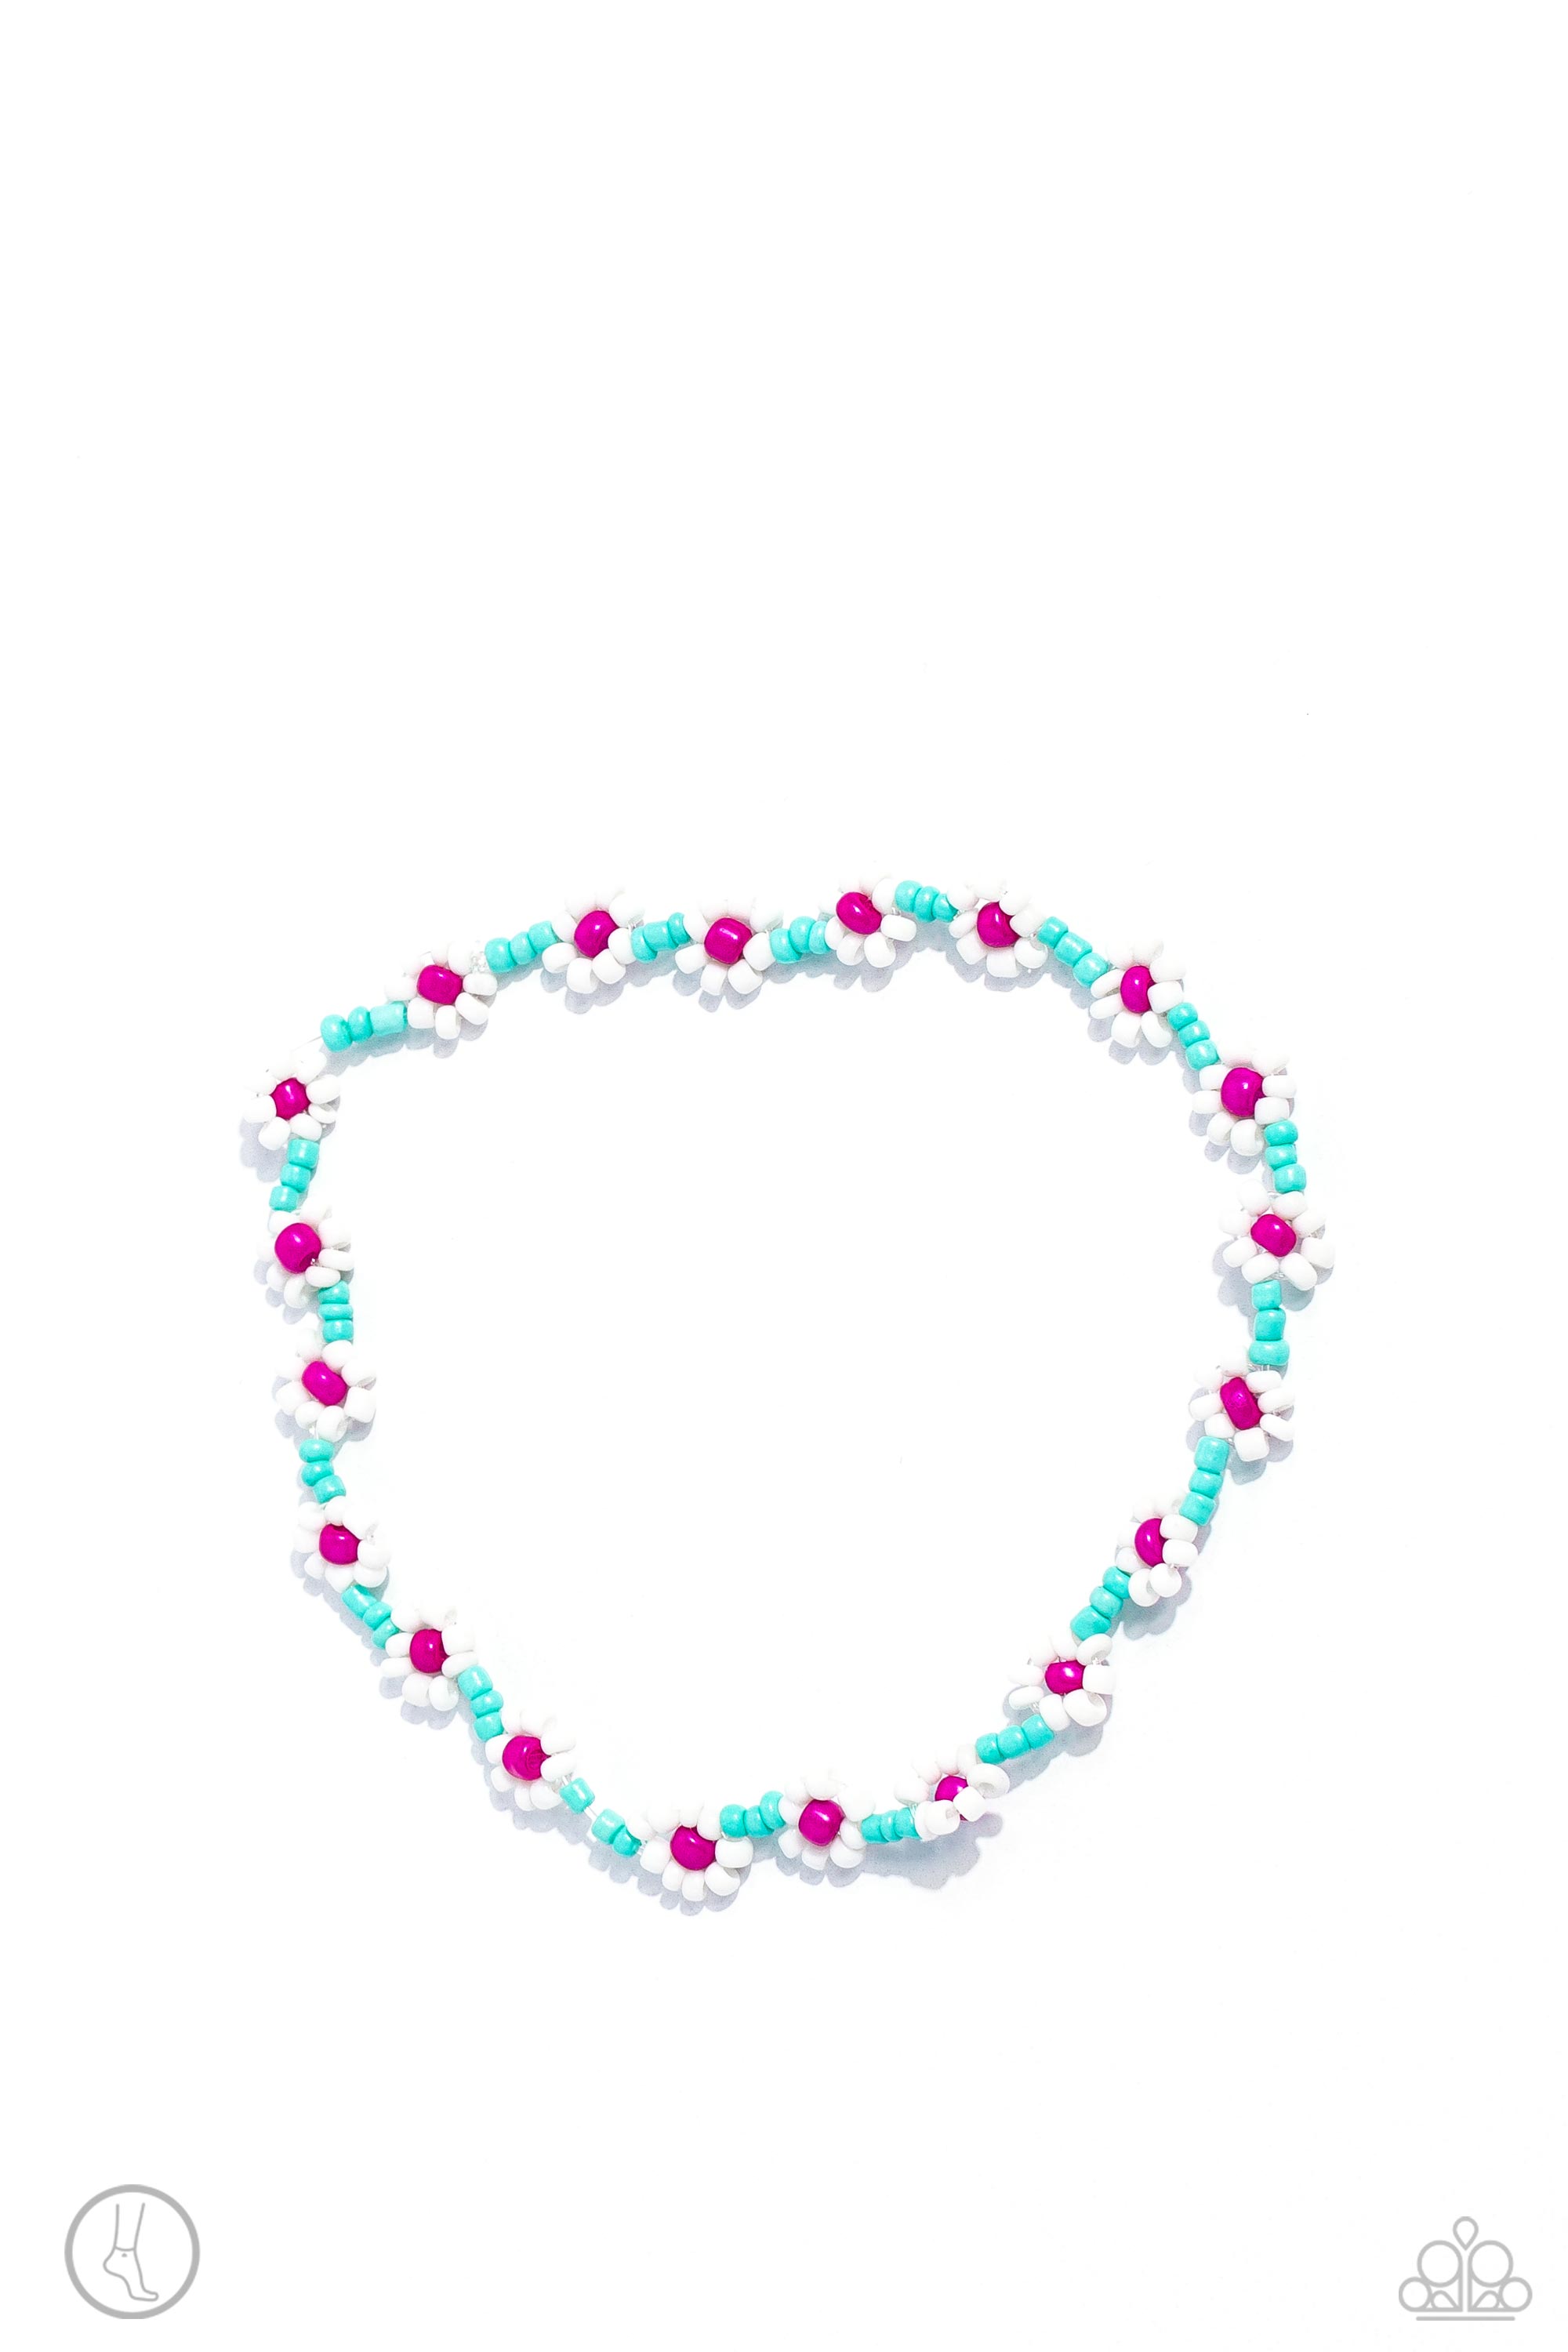 Midsummer Daisy Blue Seed Bead Flower Anklet - Paparazzi Accessories- lightbox - CarasShop.com - $5 Jewelry by Cara Jewels